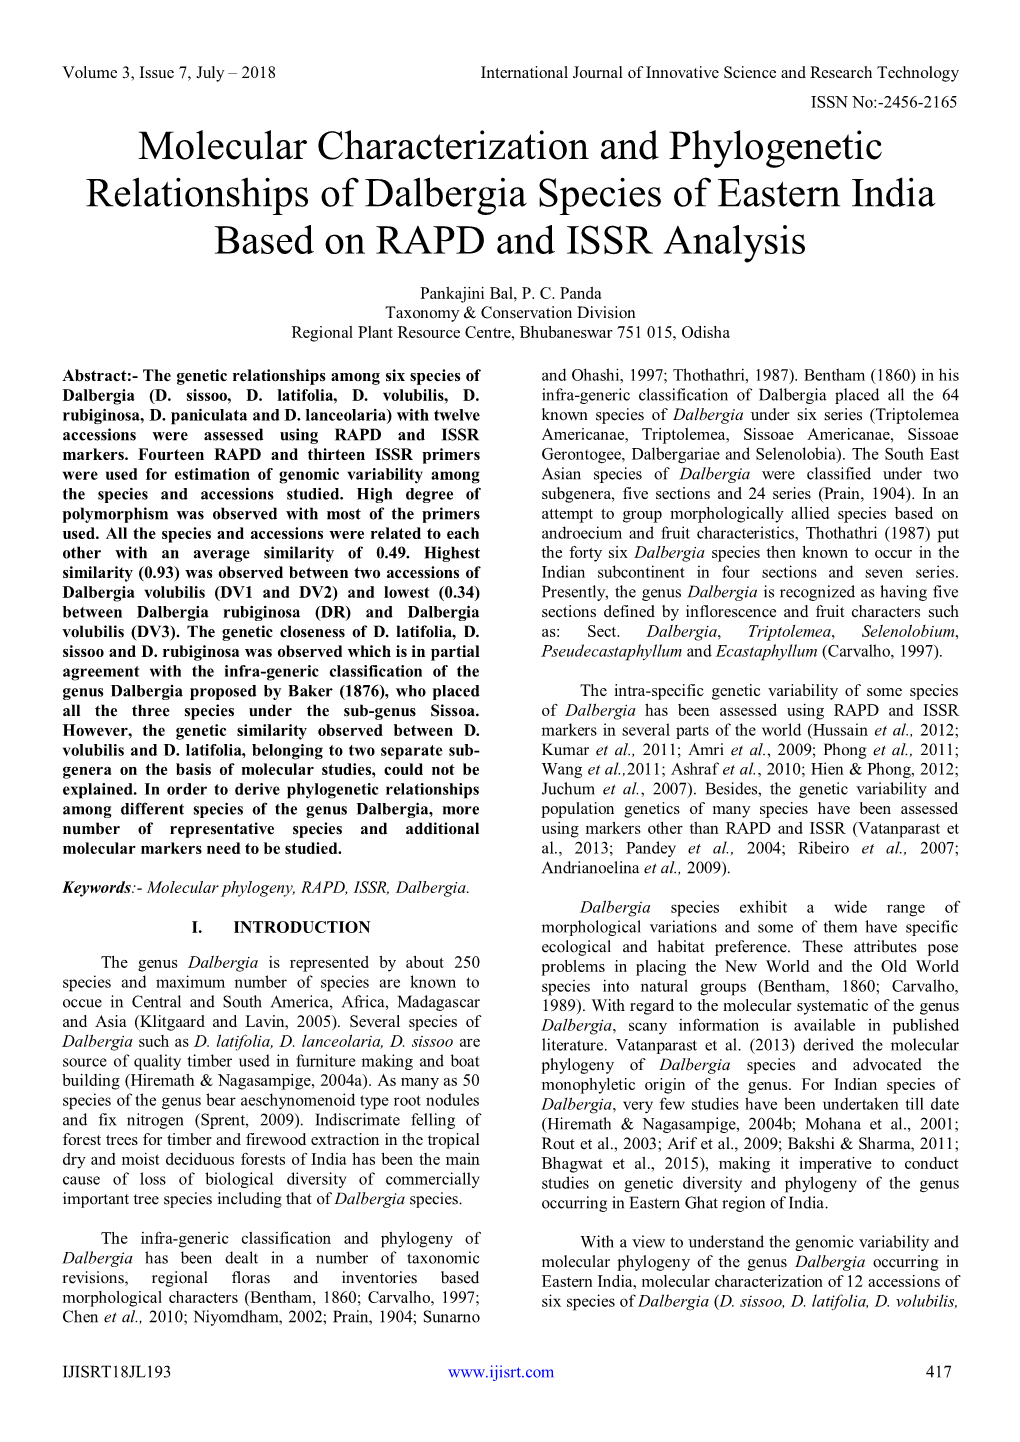 Molecular Characterization and Phylogenetic Relationships of Dalbergia Species of Eastern India Based on RAPD and ISSR Analysis